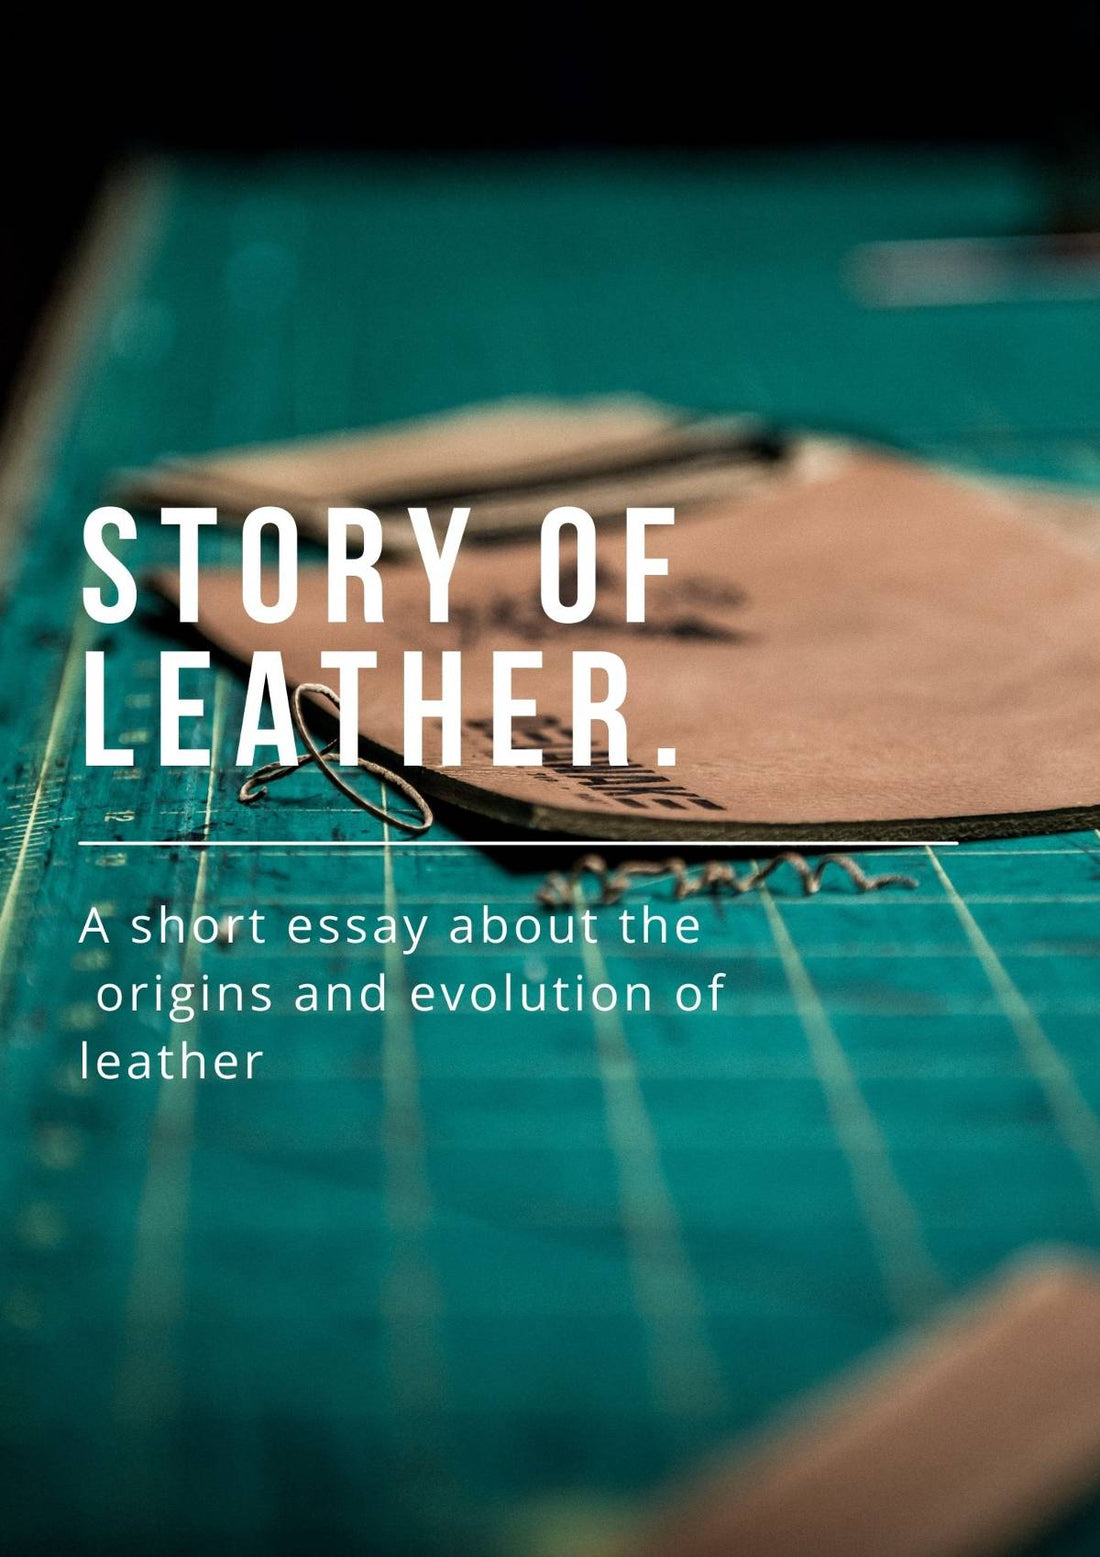 Story of Leather. - Bicyclist: Handmade Leather Goods